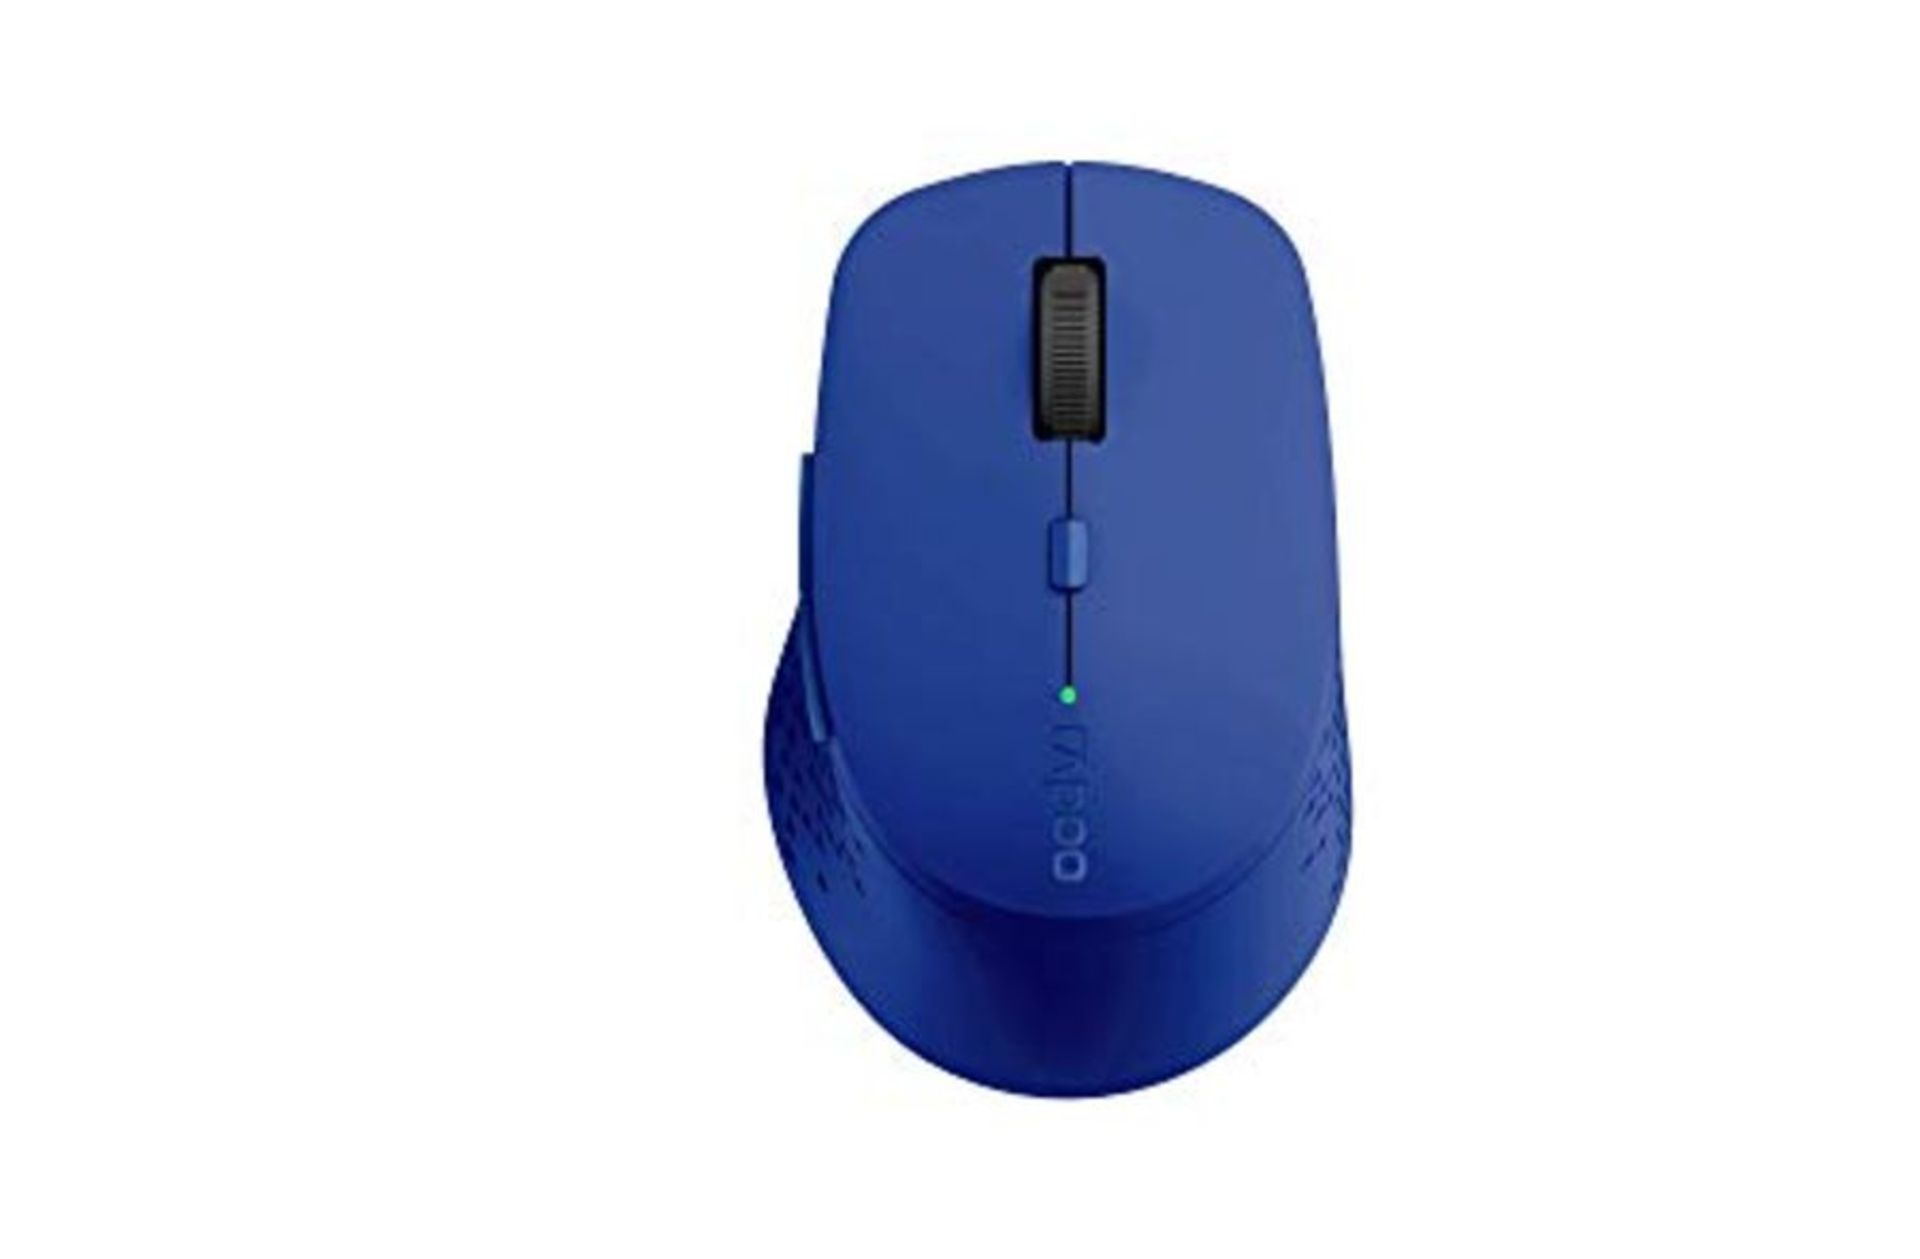 Rapoo M300 Silent Wireless Mouse, Bluetooth and Wireless (2.4 GHz) via USB, Multi-Mode